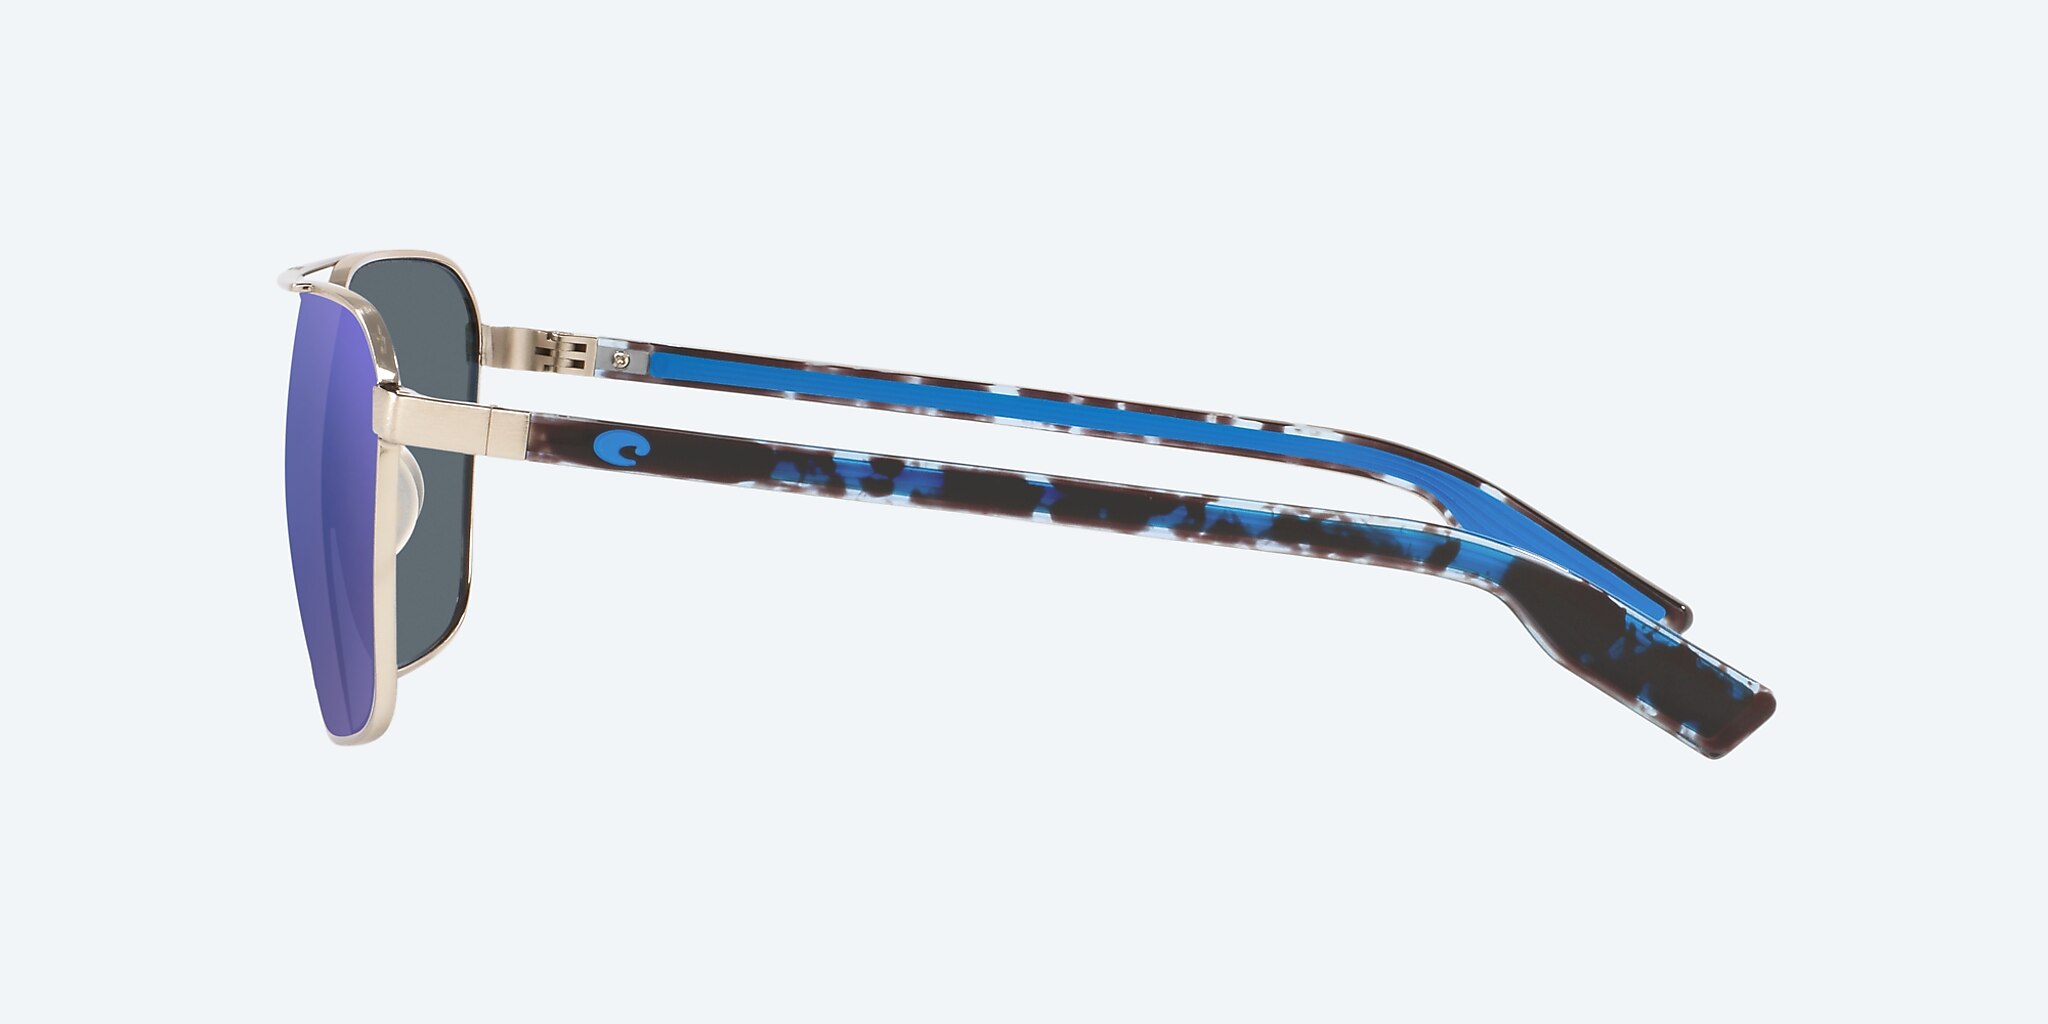 Wader Polarized Sunglasses in Blue Mirror